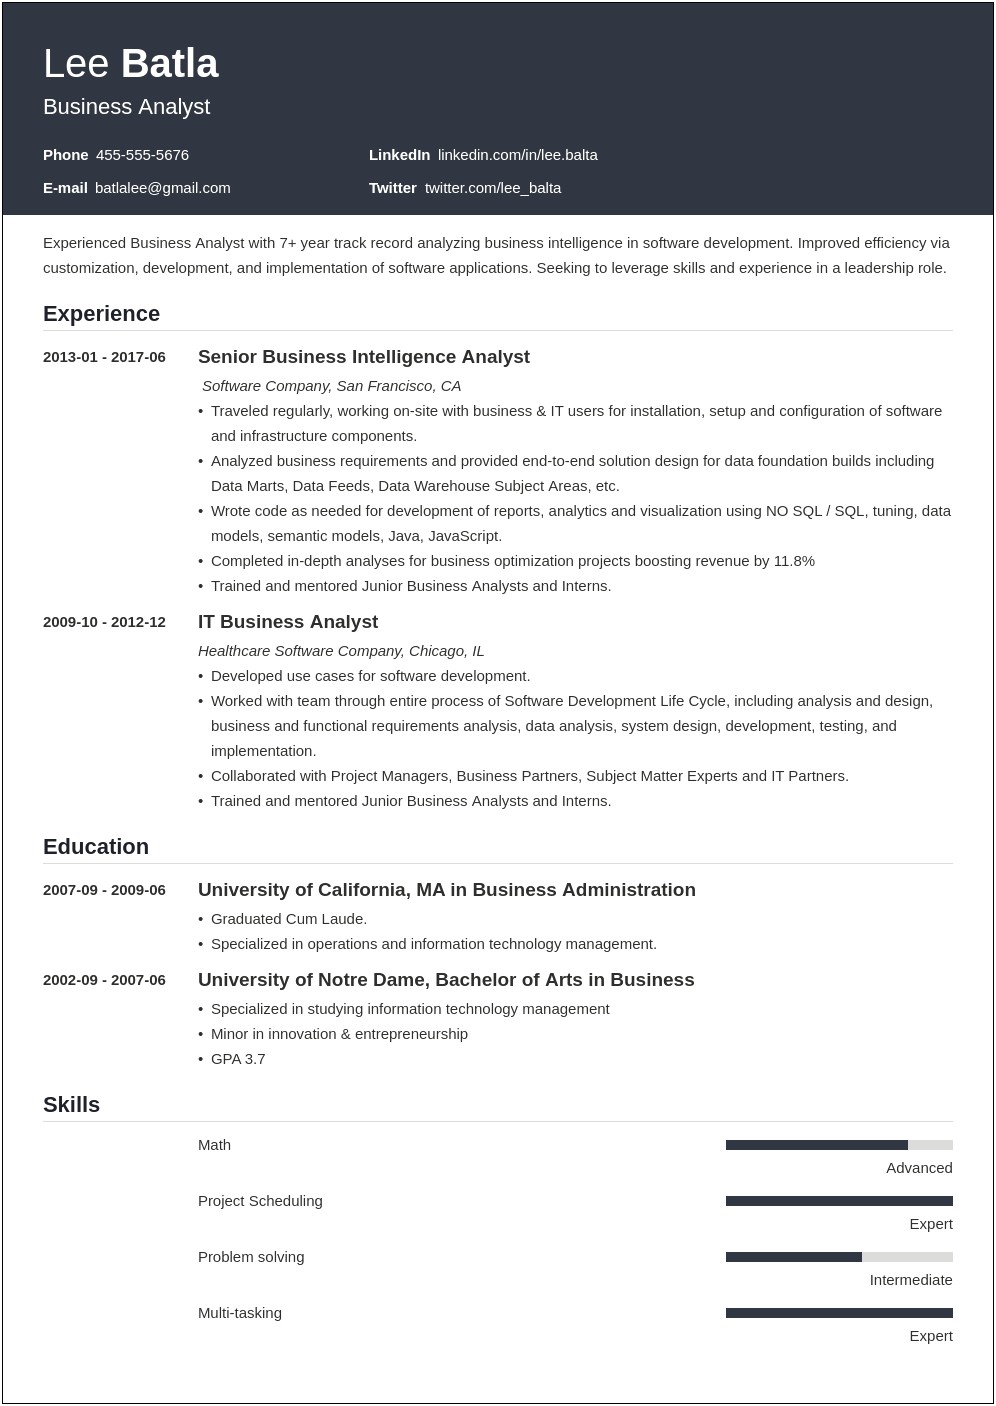 Resume Objective For Business Analyst Position